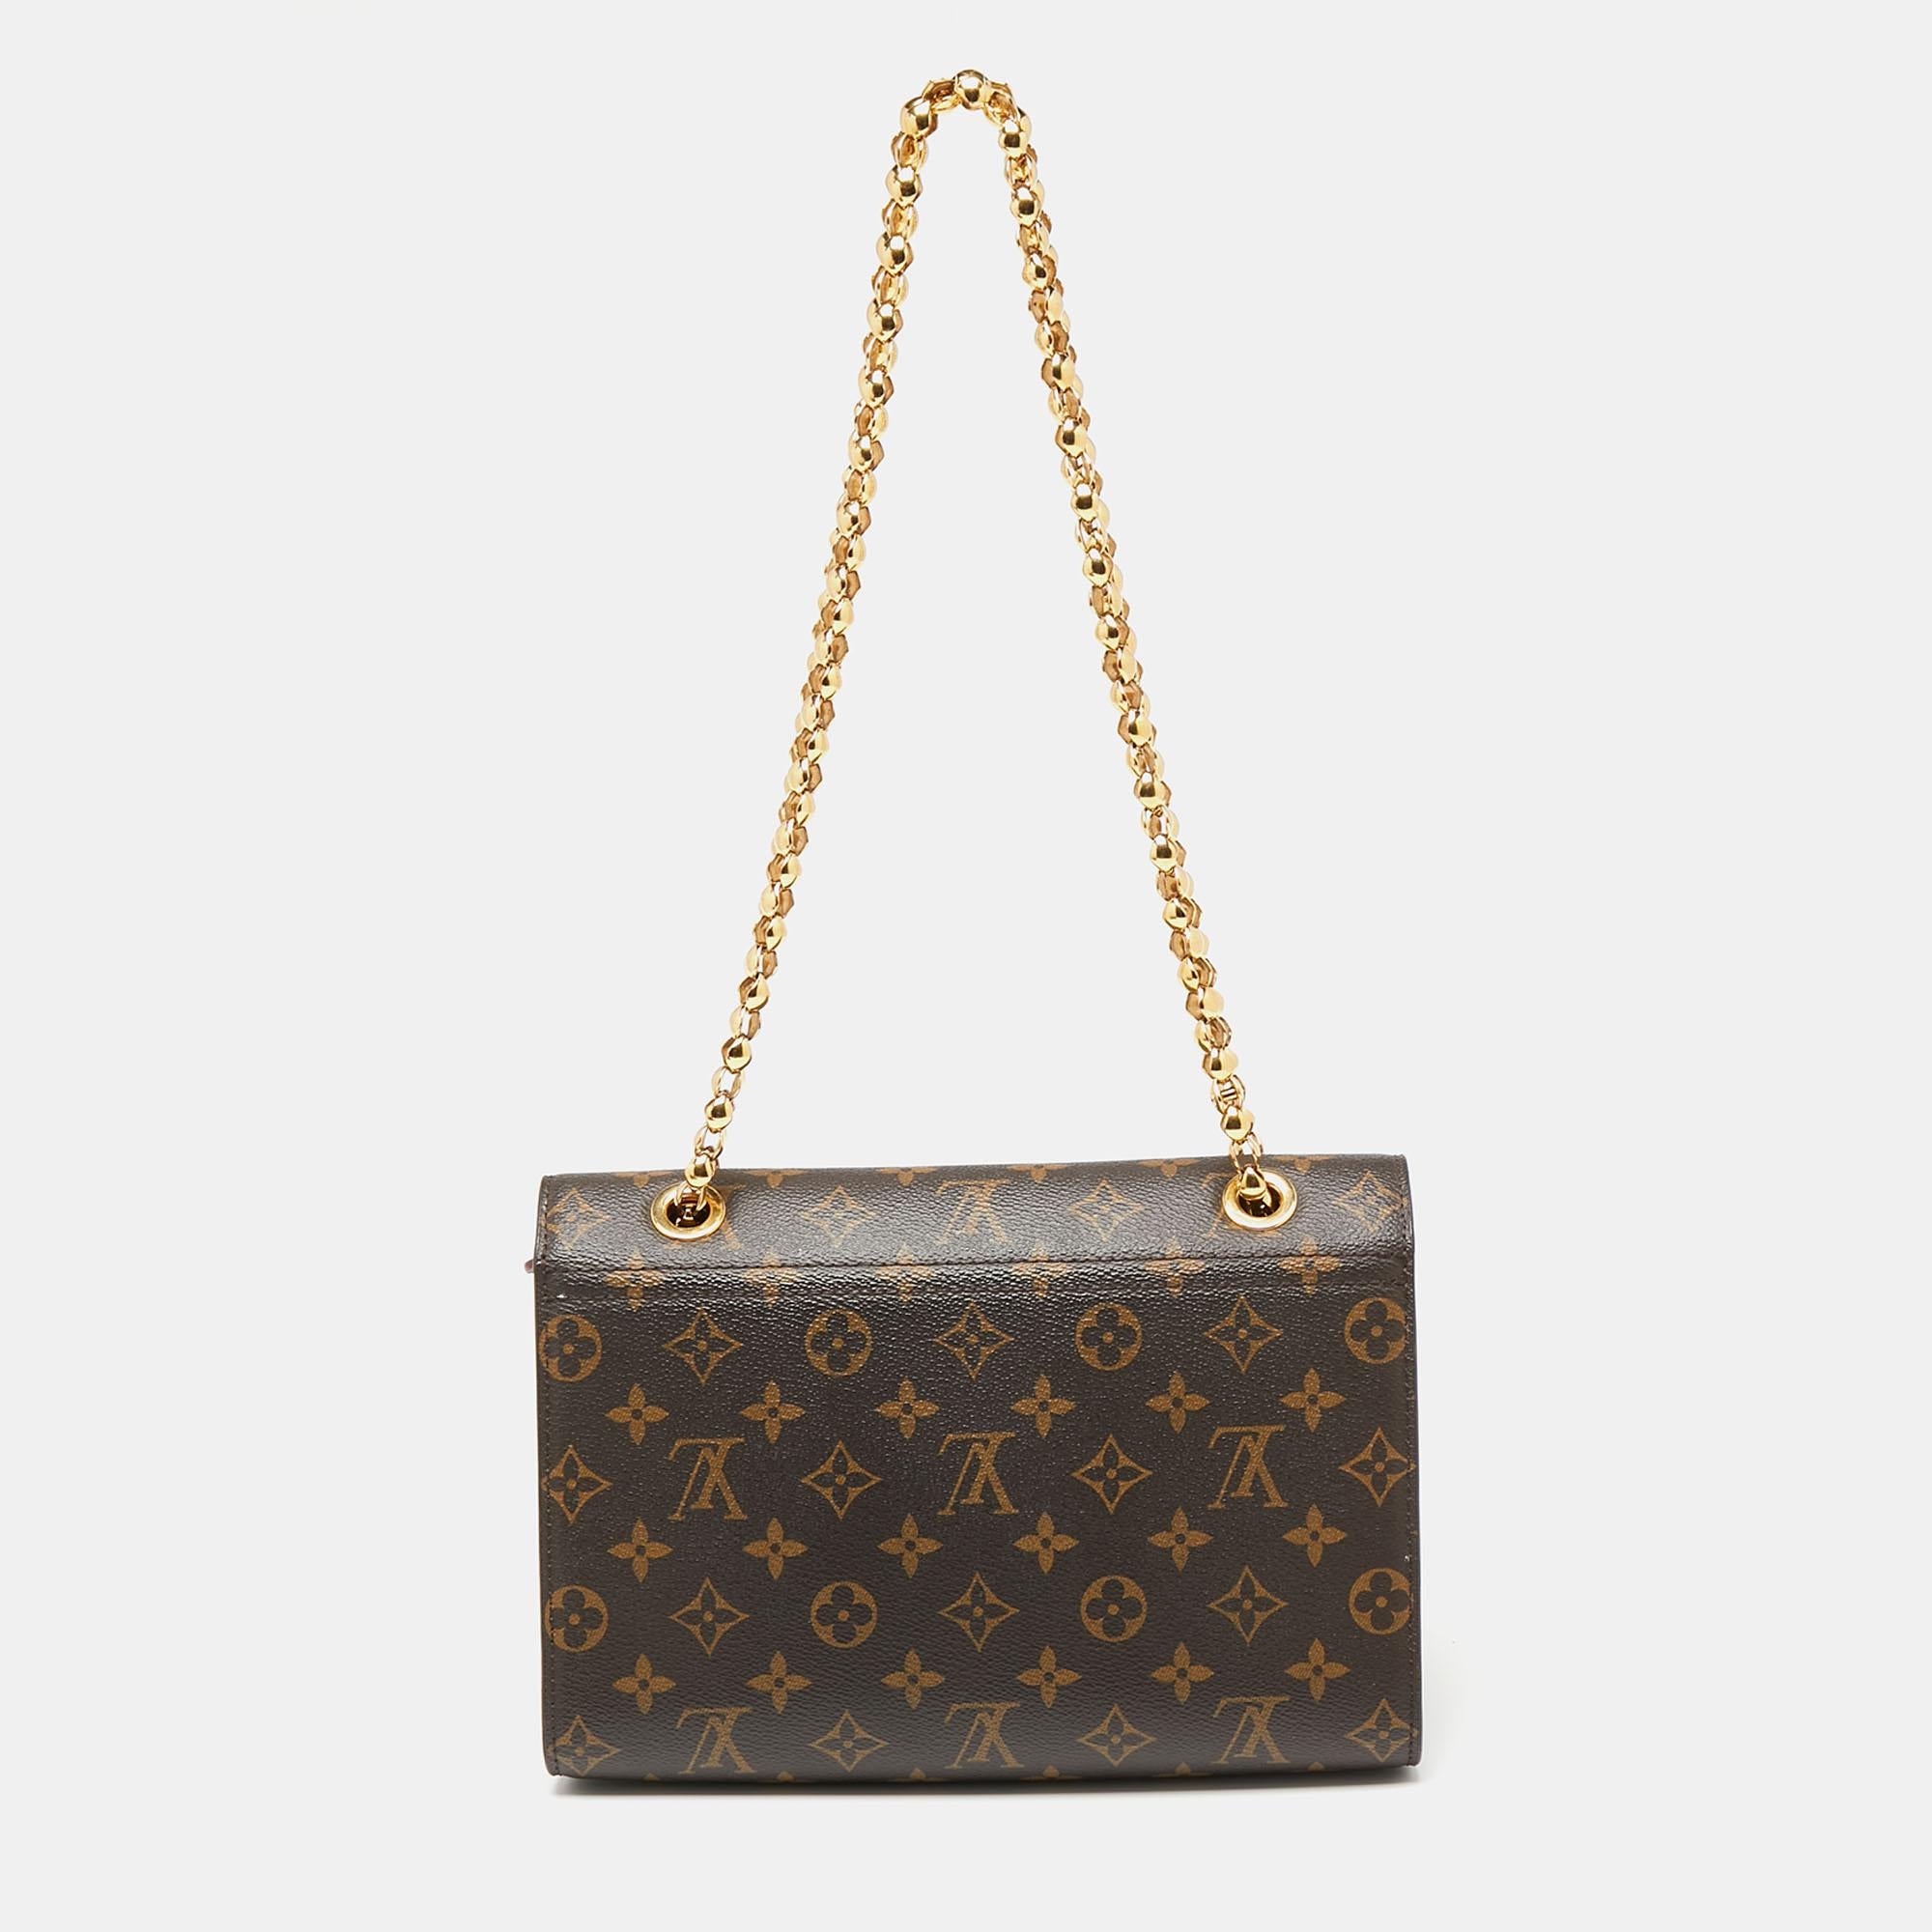 The Victoire bag pairs monogram canvas with smooth leather to give you a sophisticated day-to-evening accessory. The gold-tone closure is fixed on the front flap and the sliding chain strap helps you carry the bag easily. Large enough to fit your